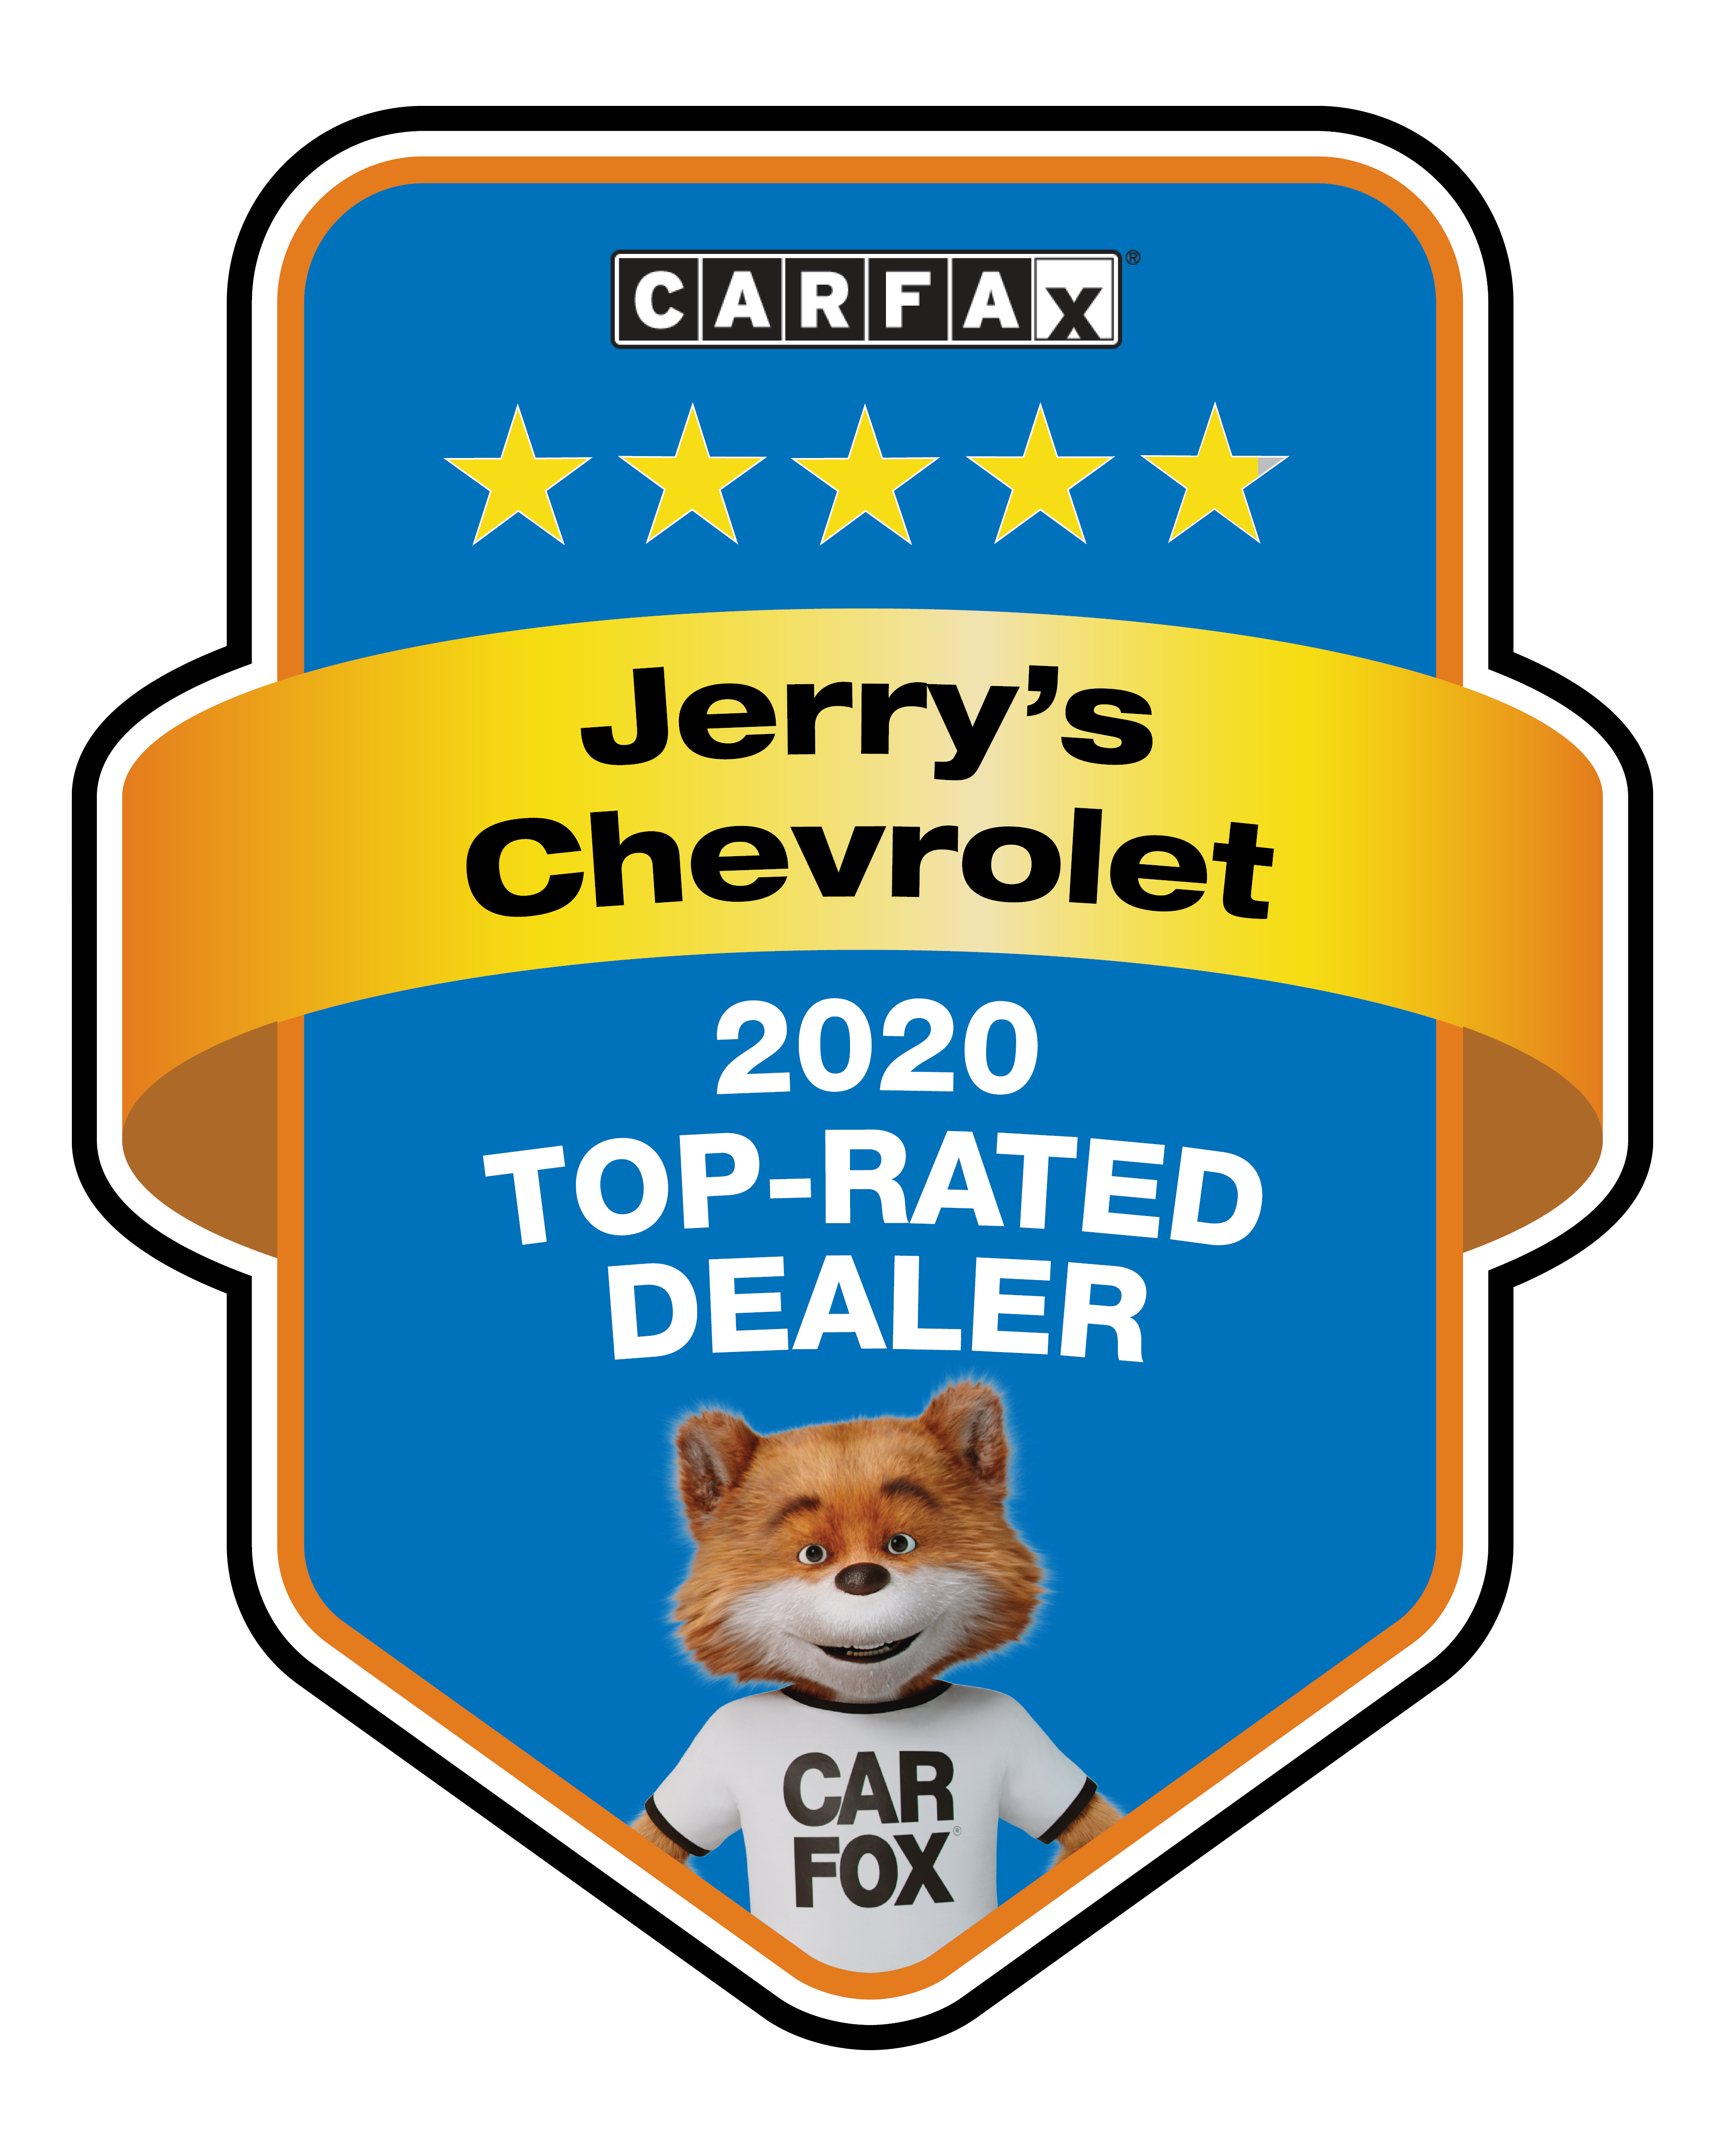 Jerry's Leesburg Chevrolet Carfax 2019 Top-Rated Dealer